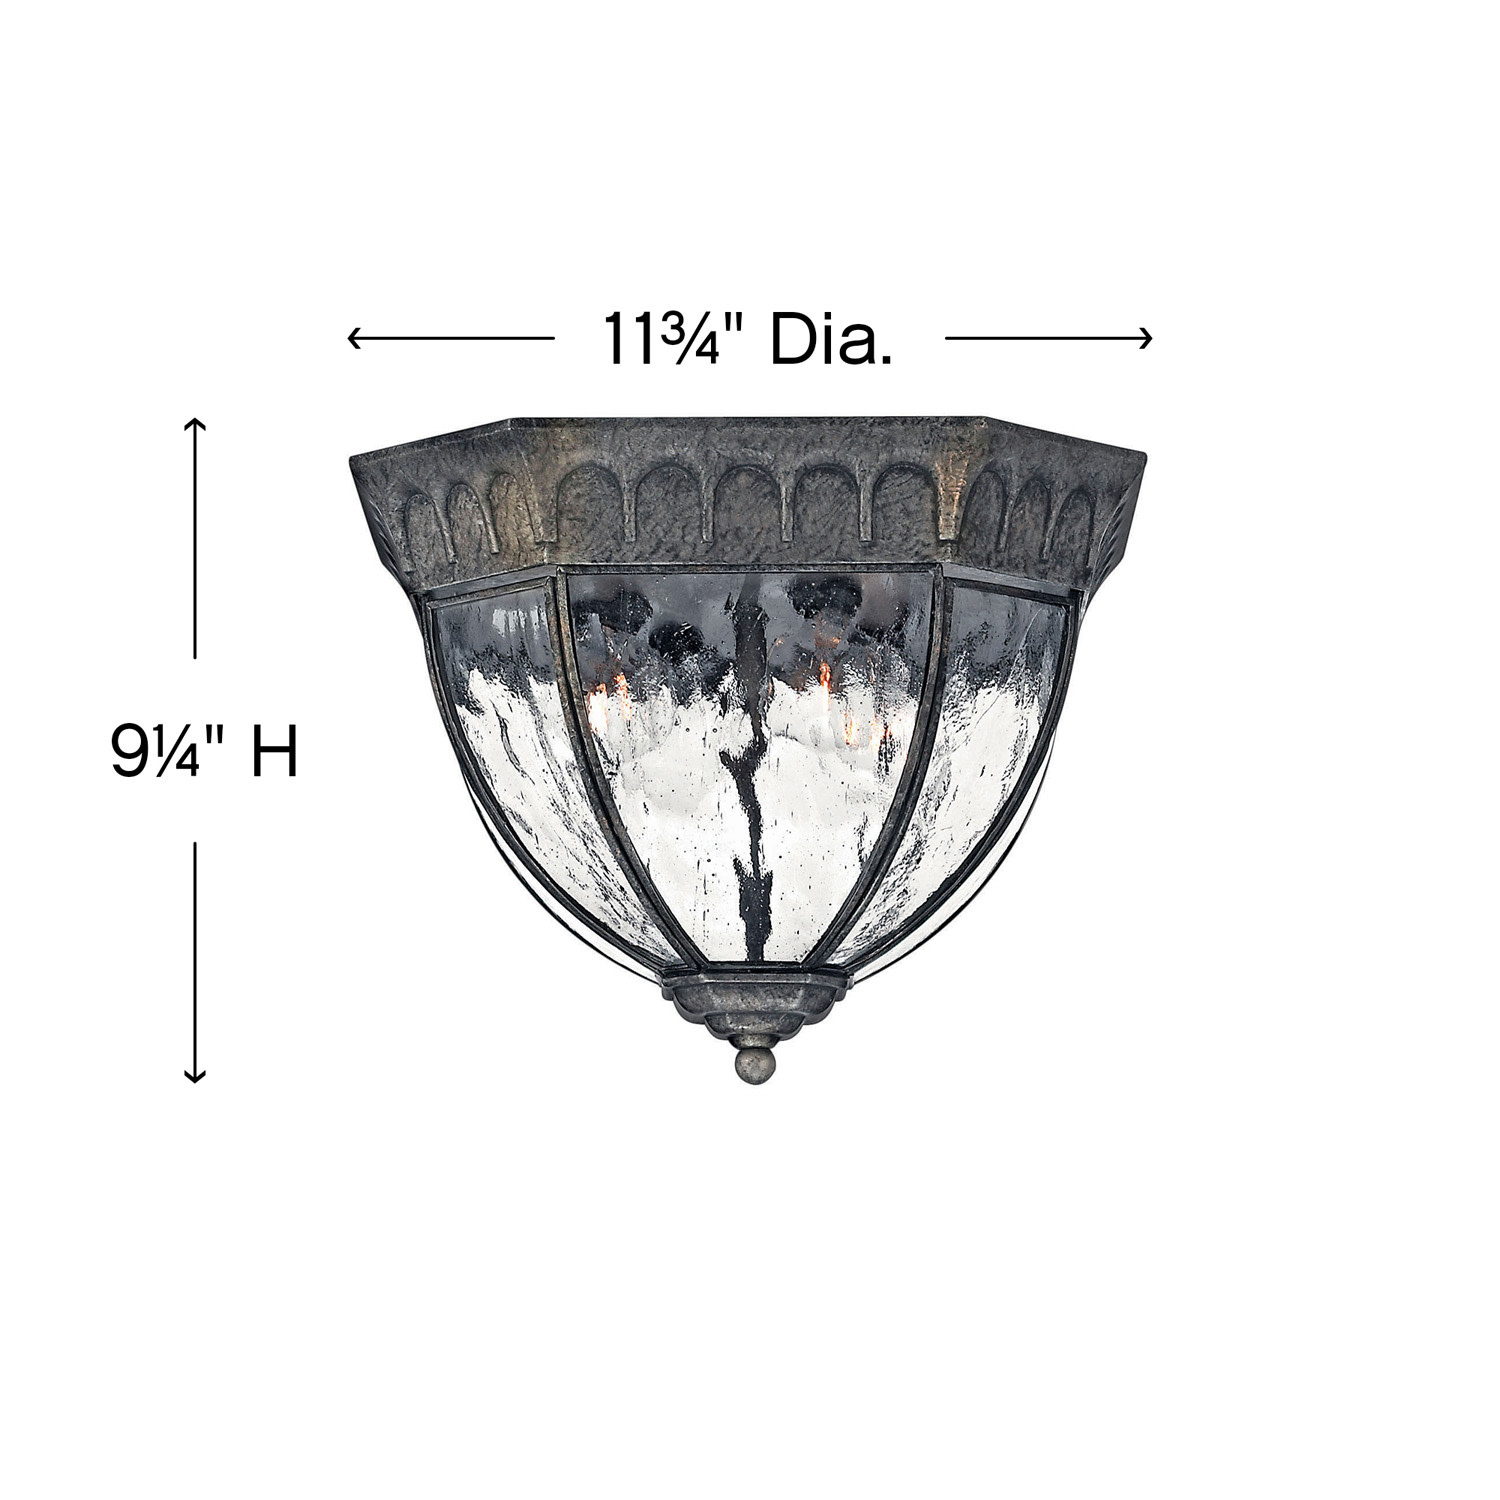 Hinkley Lighting H1713 4 Light Outdoor Flush Mount Ceiling Fixture From The Regal - image 3 of 3